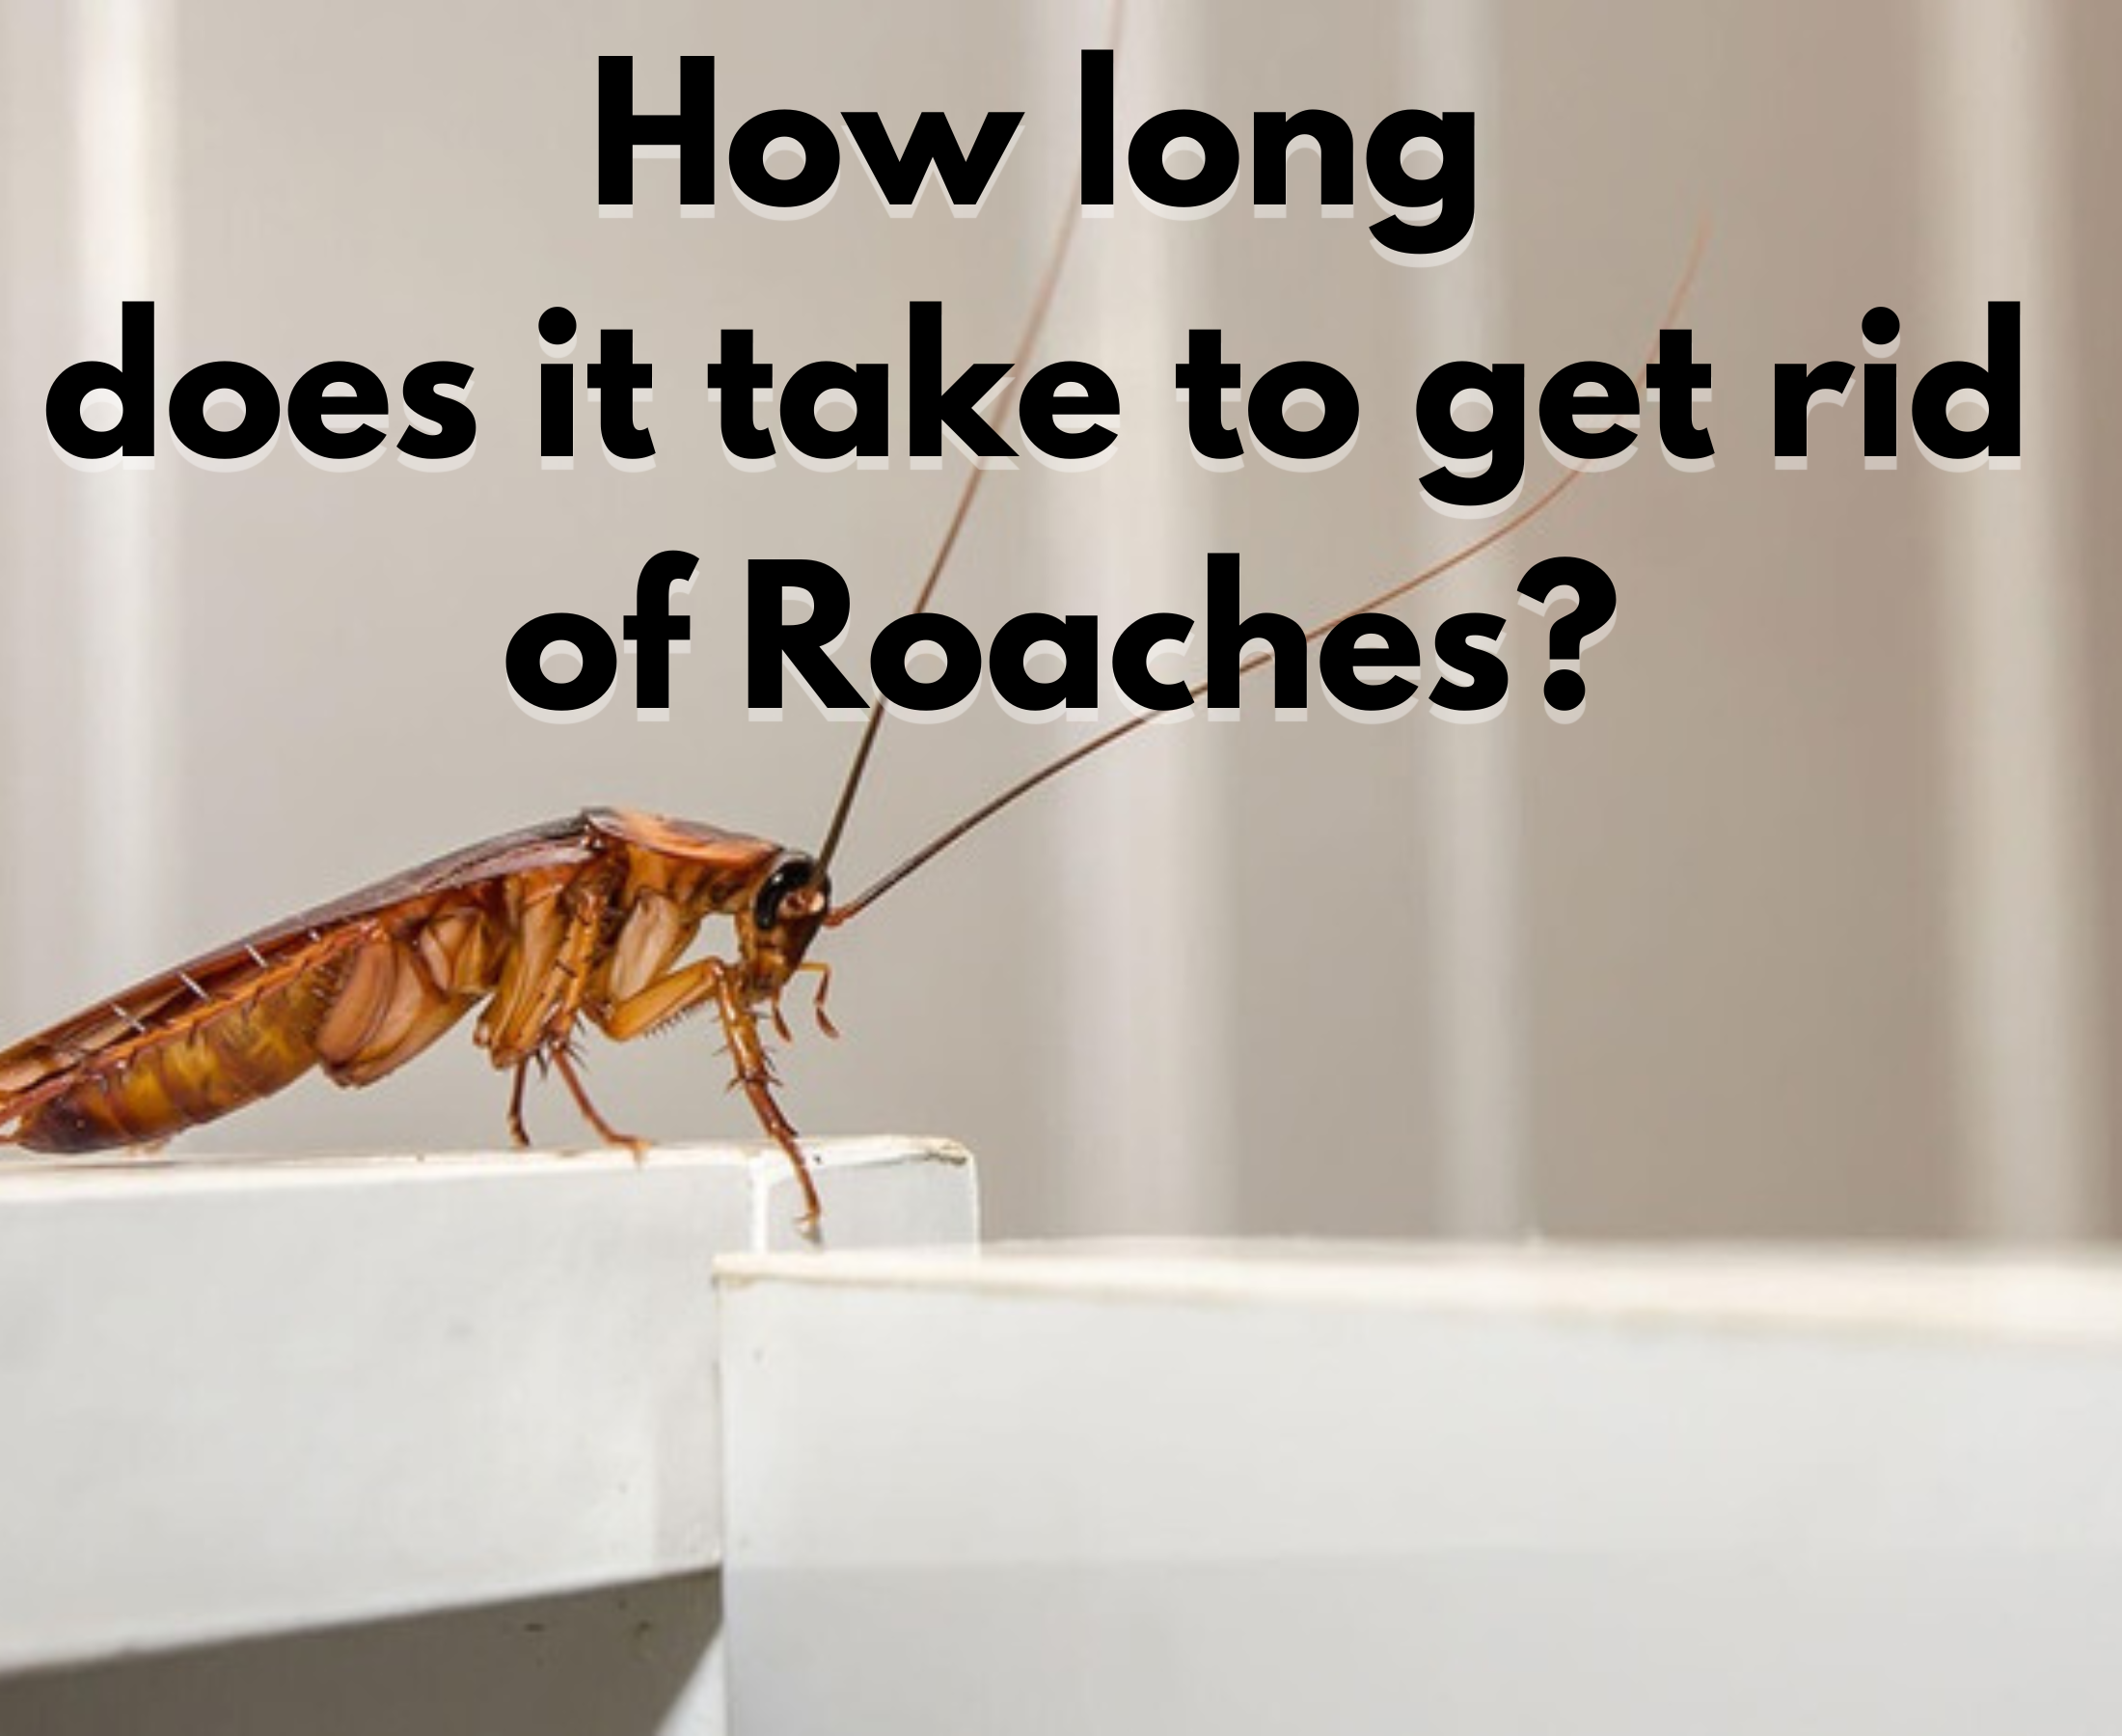 How long does it take to terminate the cockroach problem?